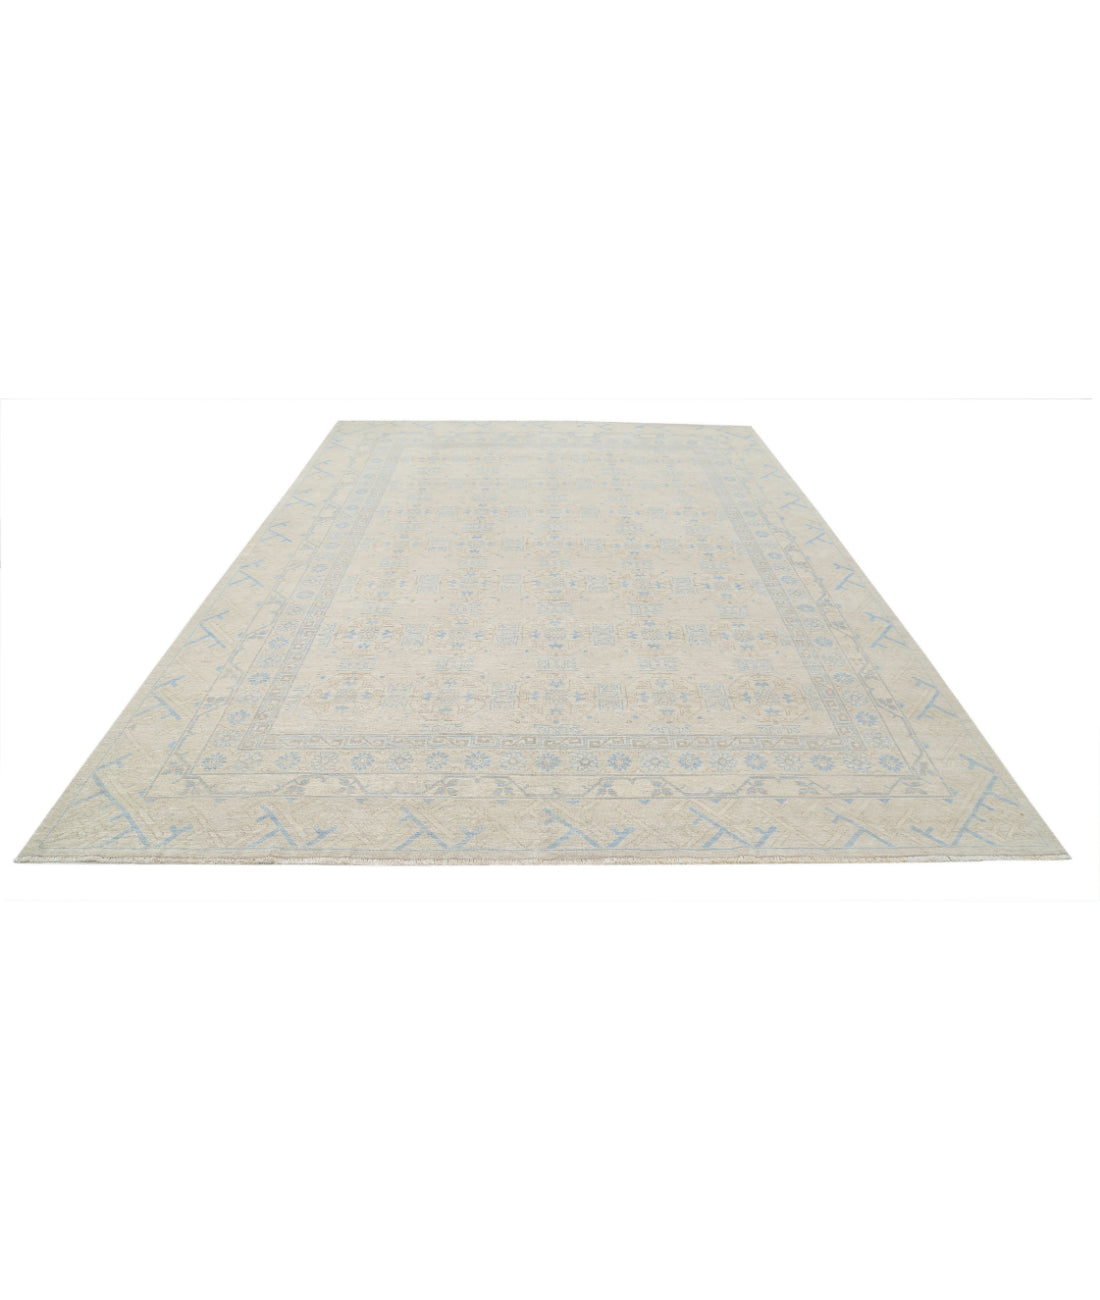 Hand Knotted Khotan Wool Rug - 8'9'' x 11'11'' 8'9'' x 11'11'' (263 X 358) / Taupe / Ivory